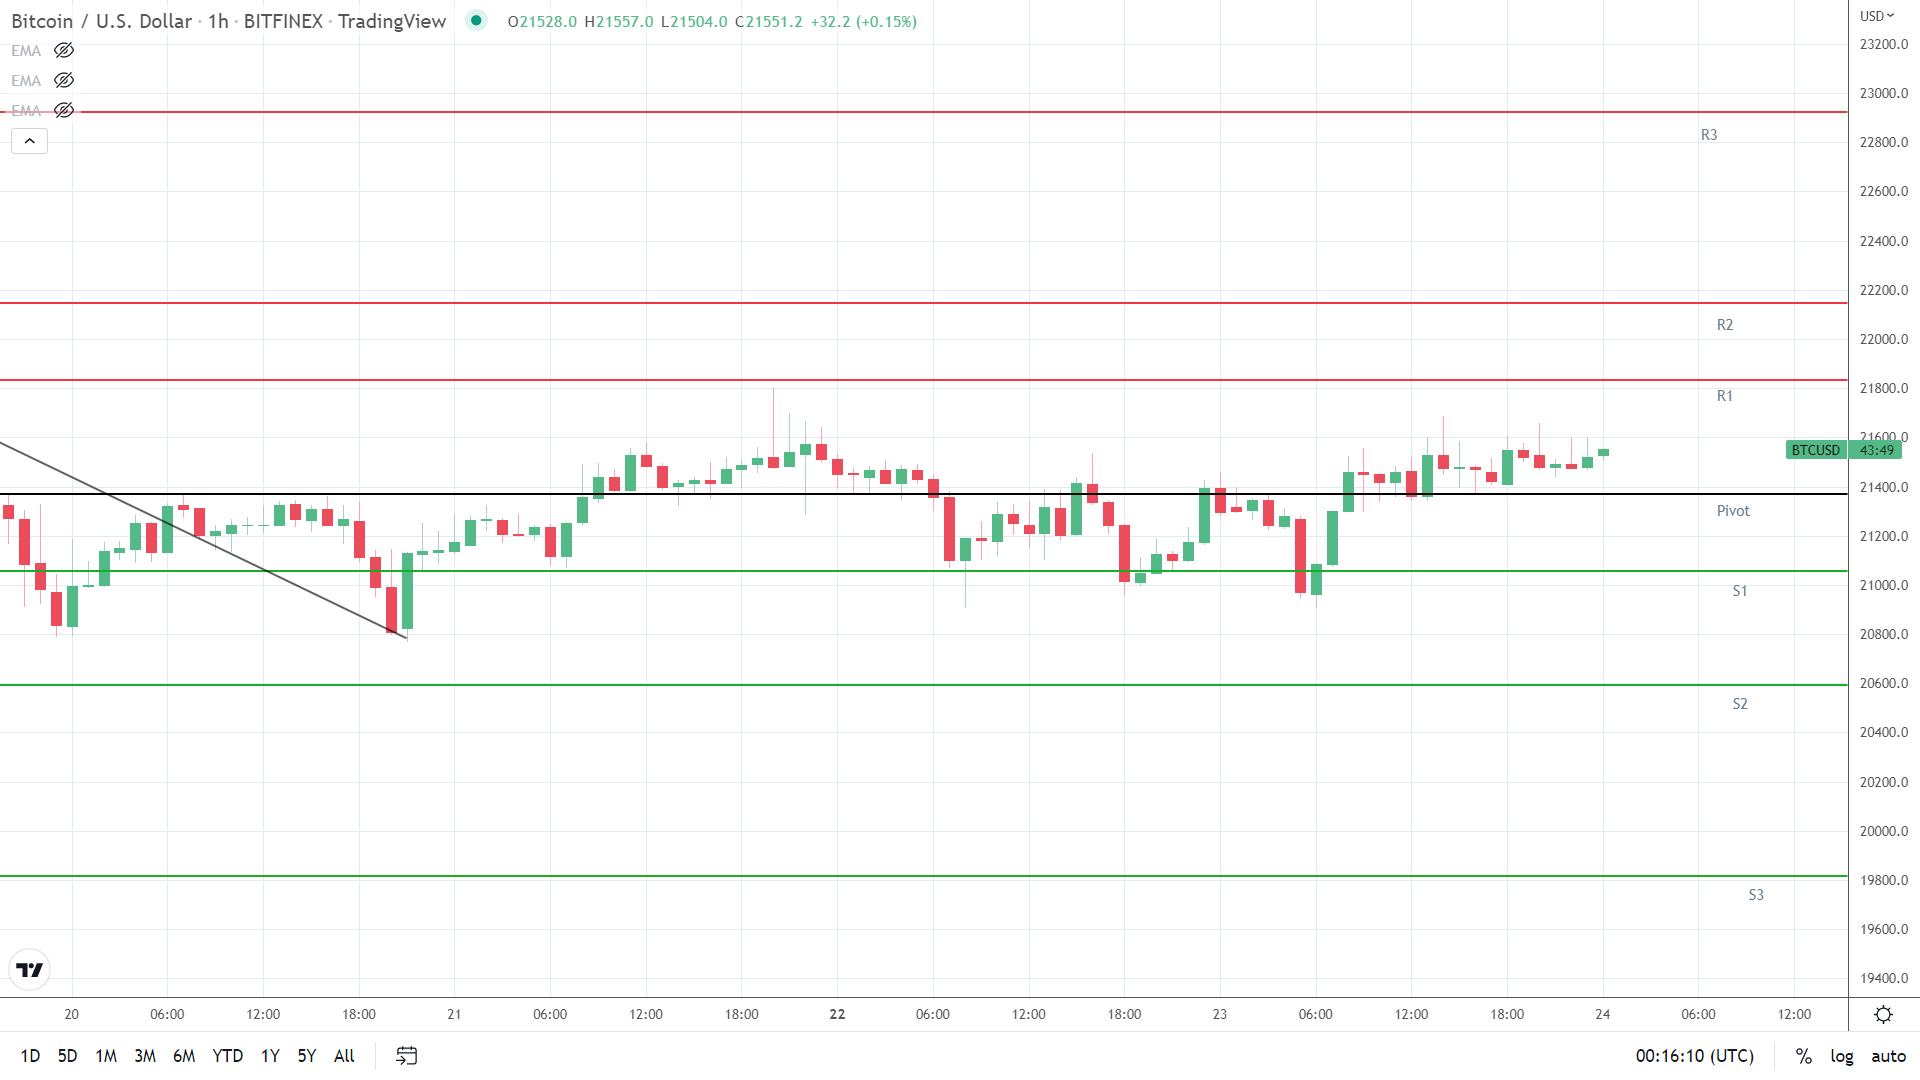 BTC resistance levels in play.